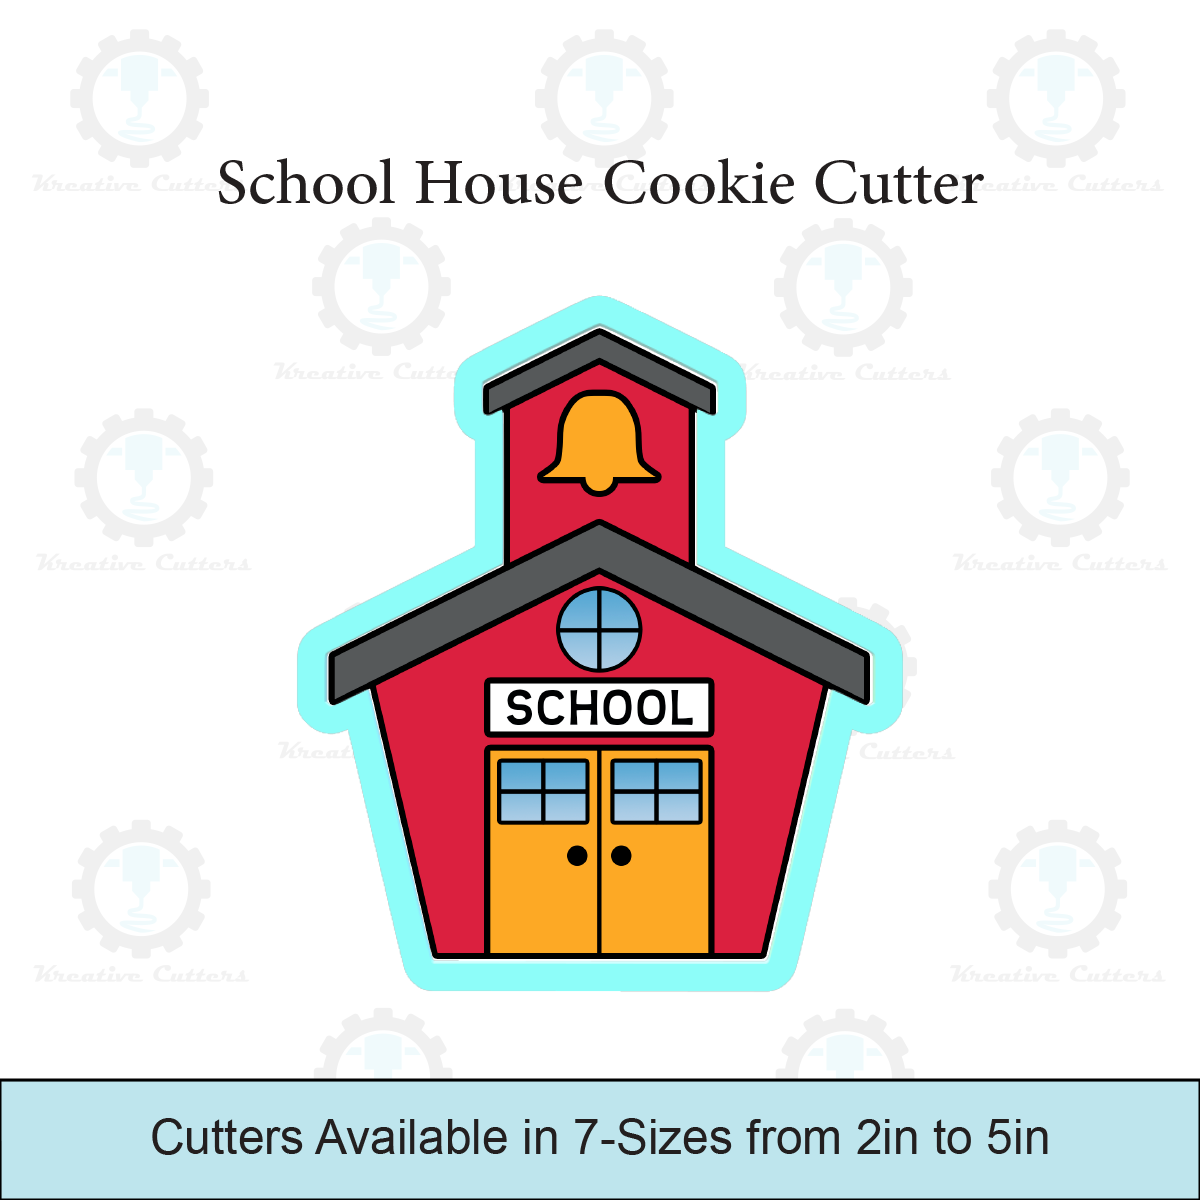 School House Cookie Cutters